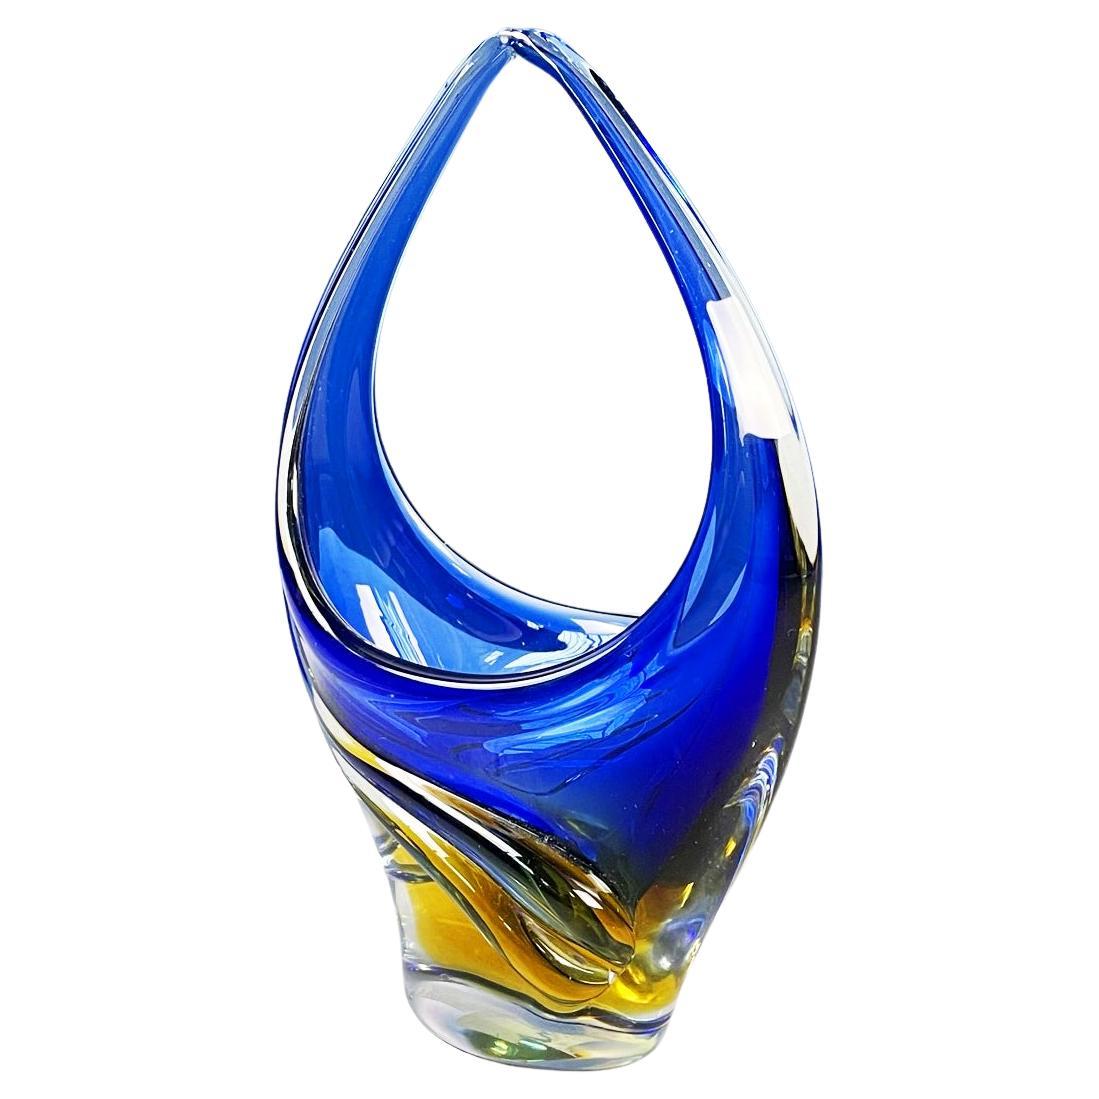 Italian Modern Sculpture in Blue and Yellow Murano Glass, 1970s For Sale